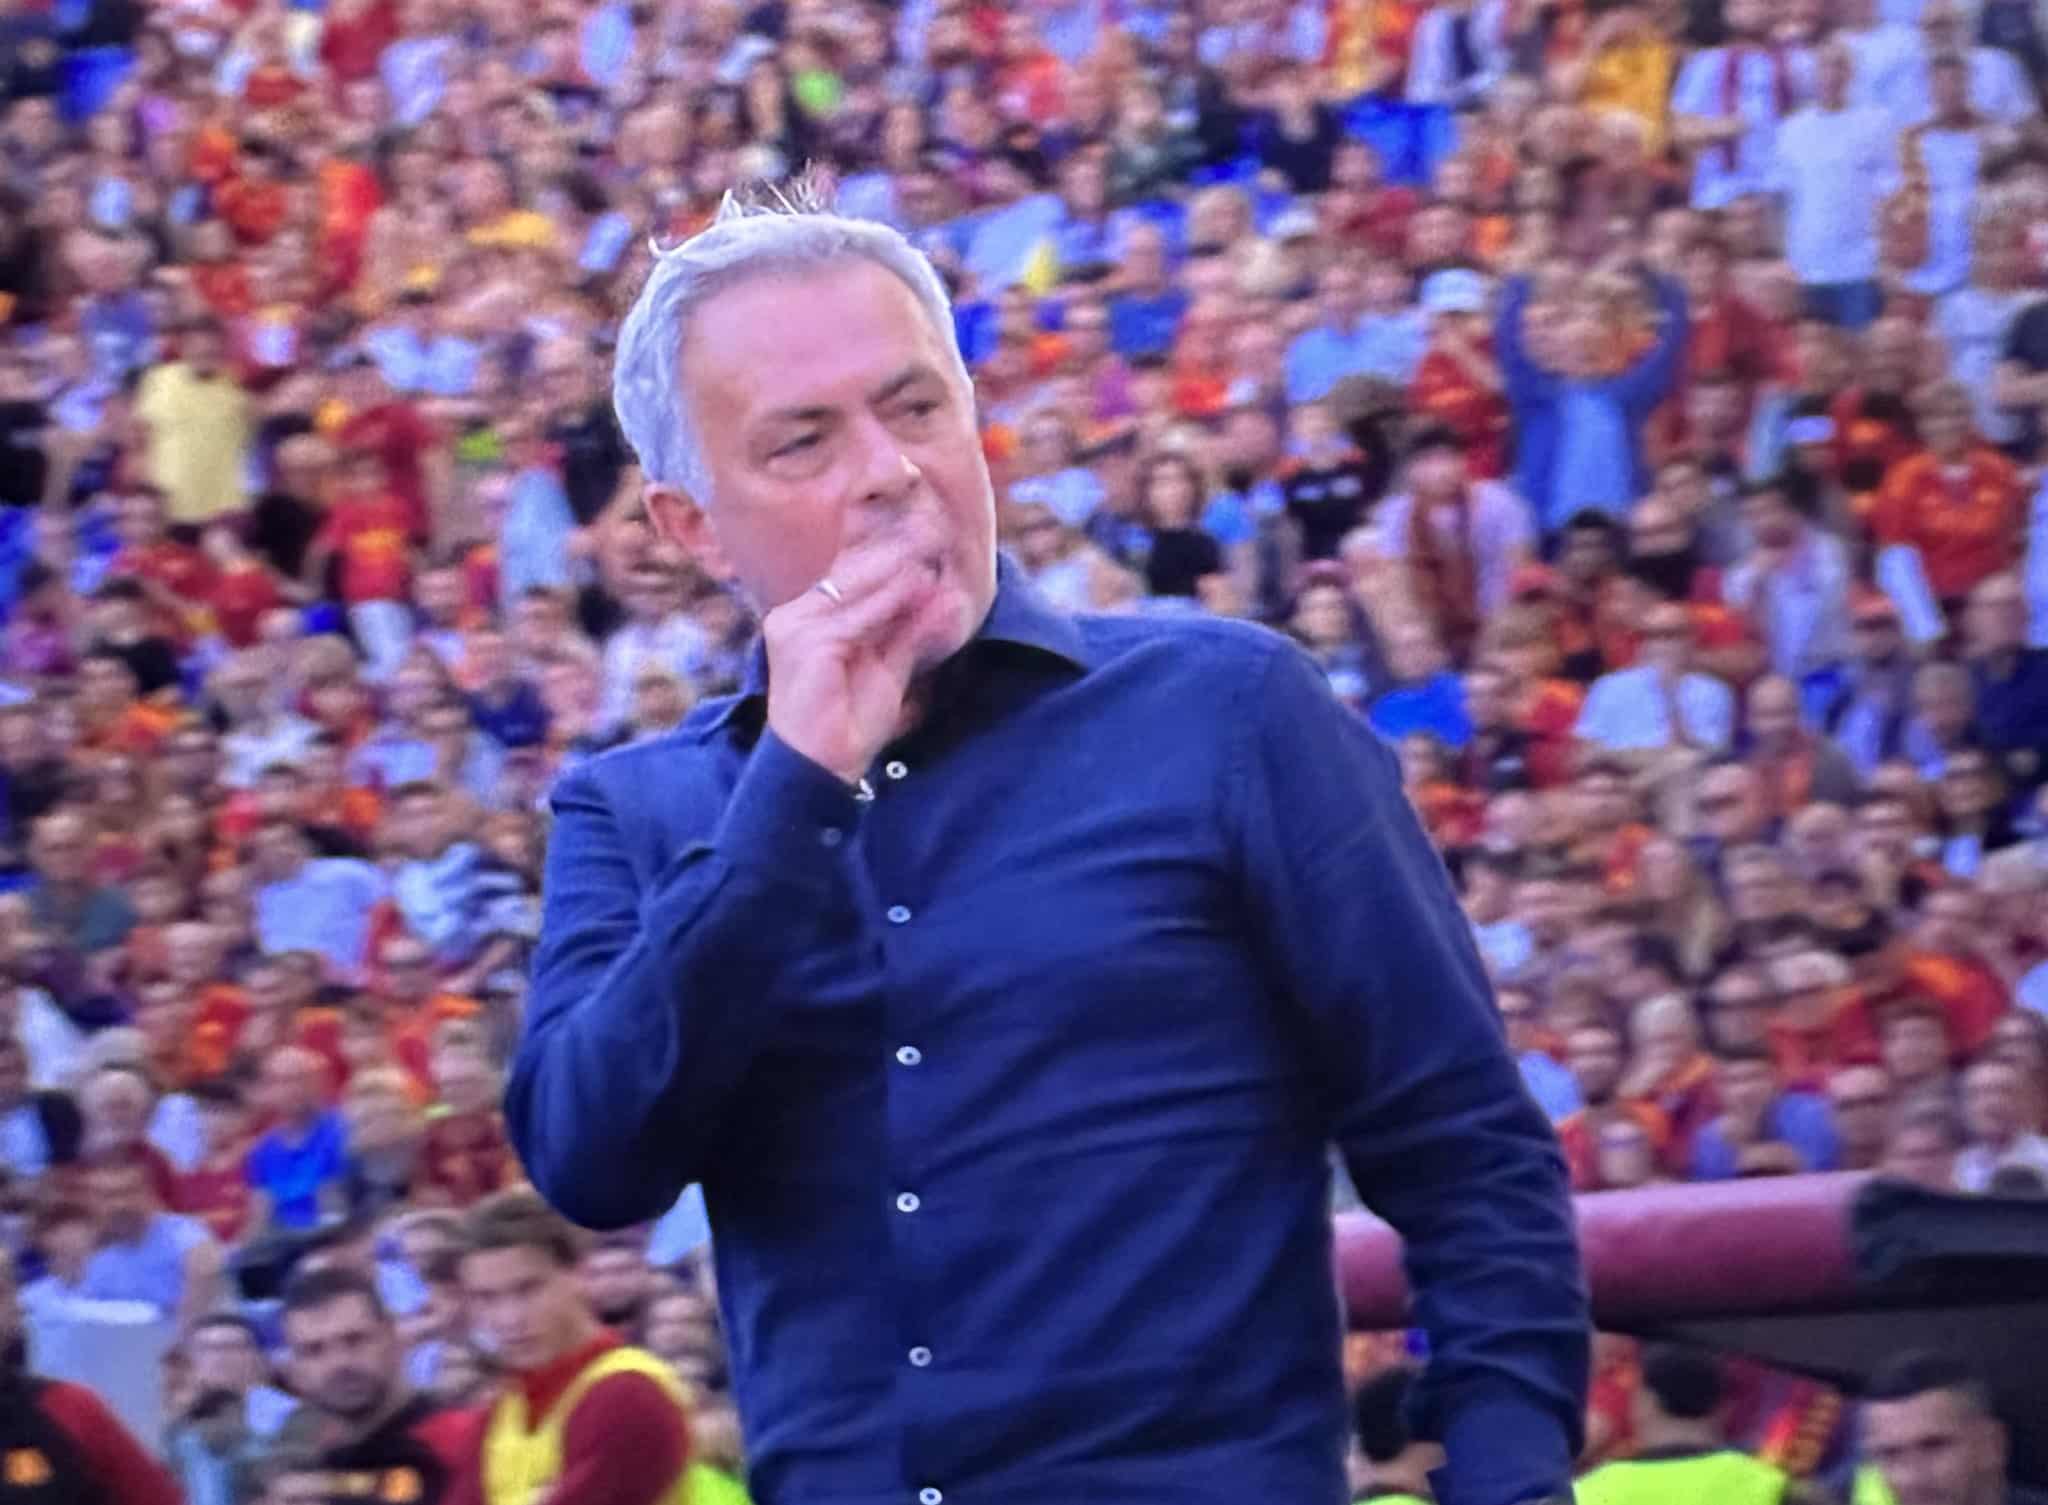 The manager of Roma, Jose Mourinho, returned to the bad books of Referees earlier today as he was sent off against Monza.